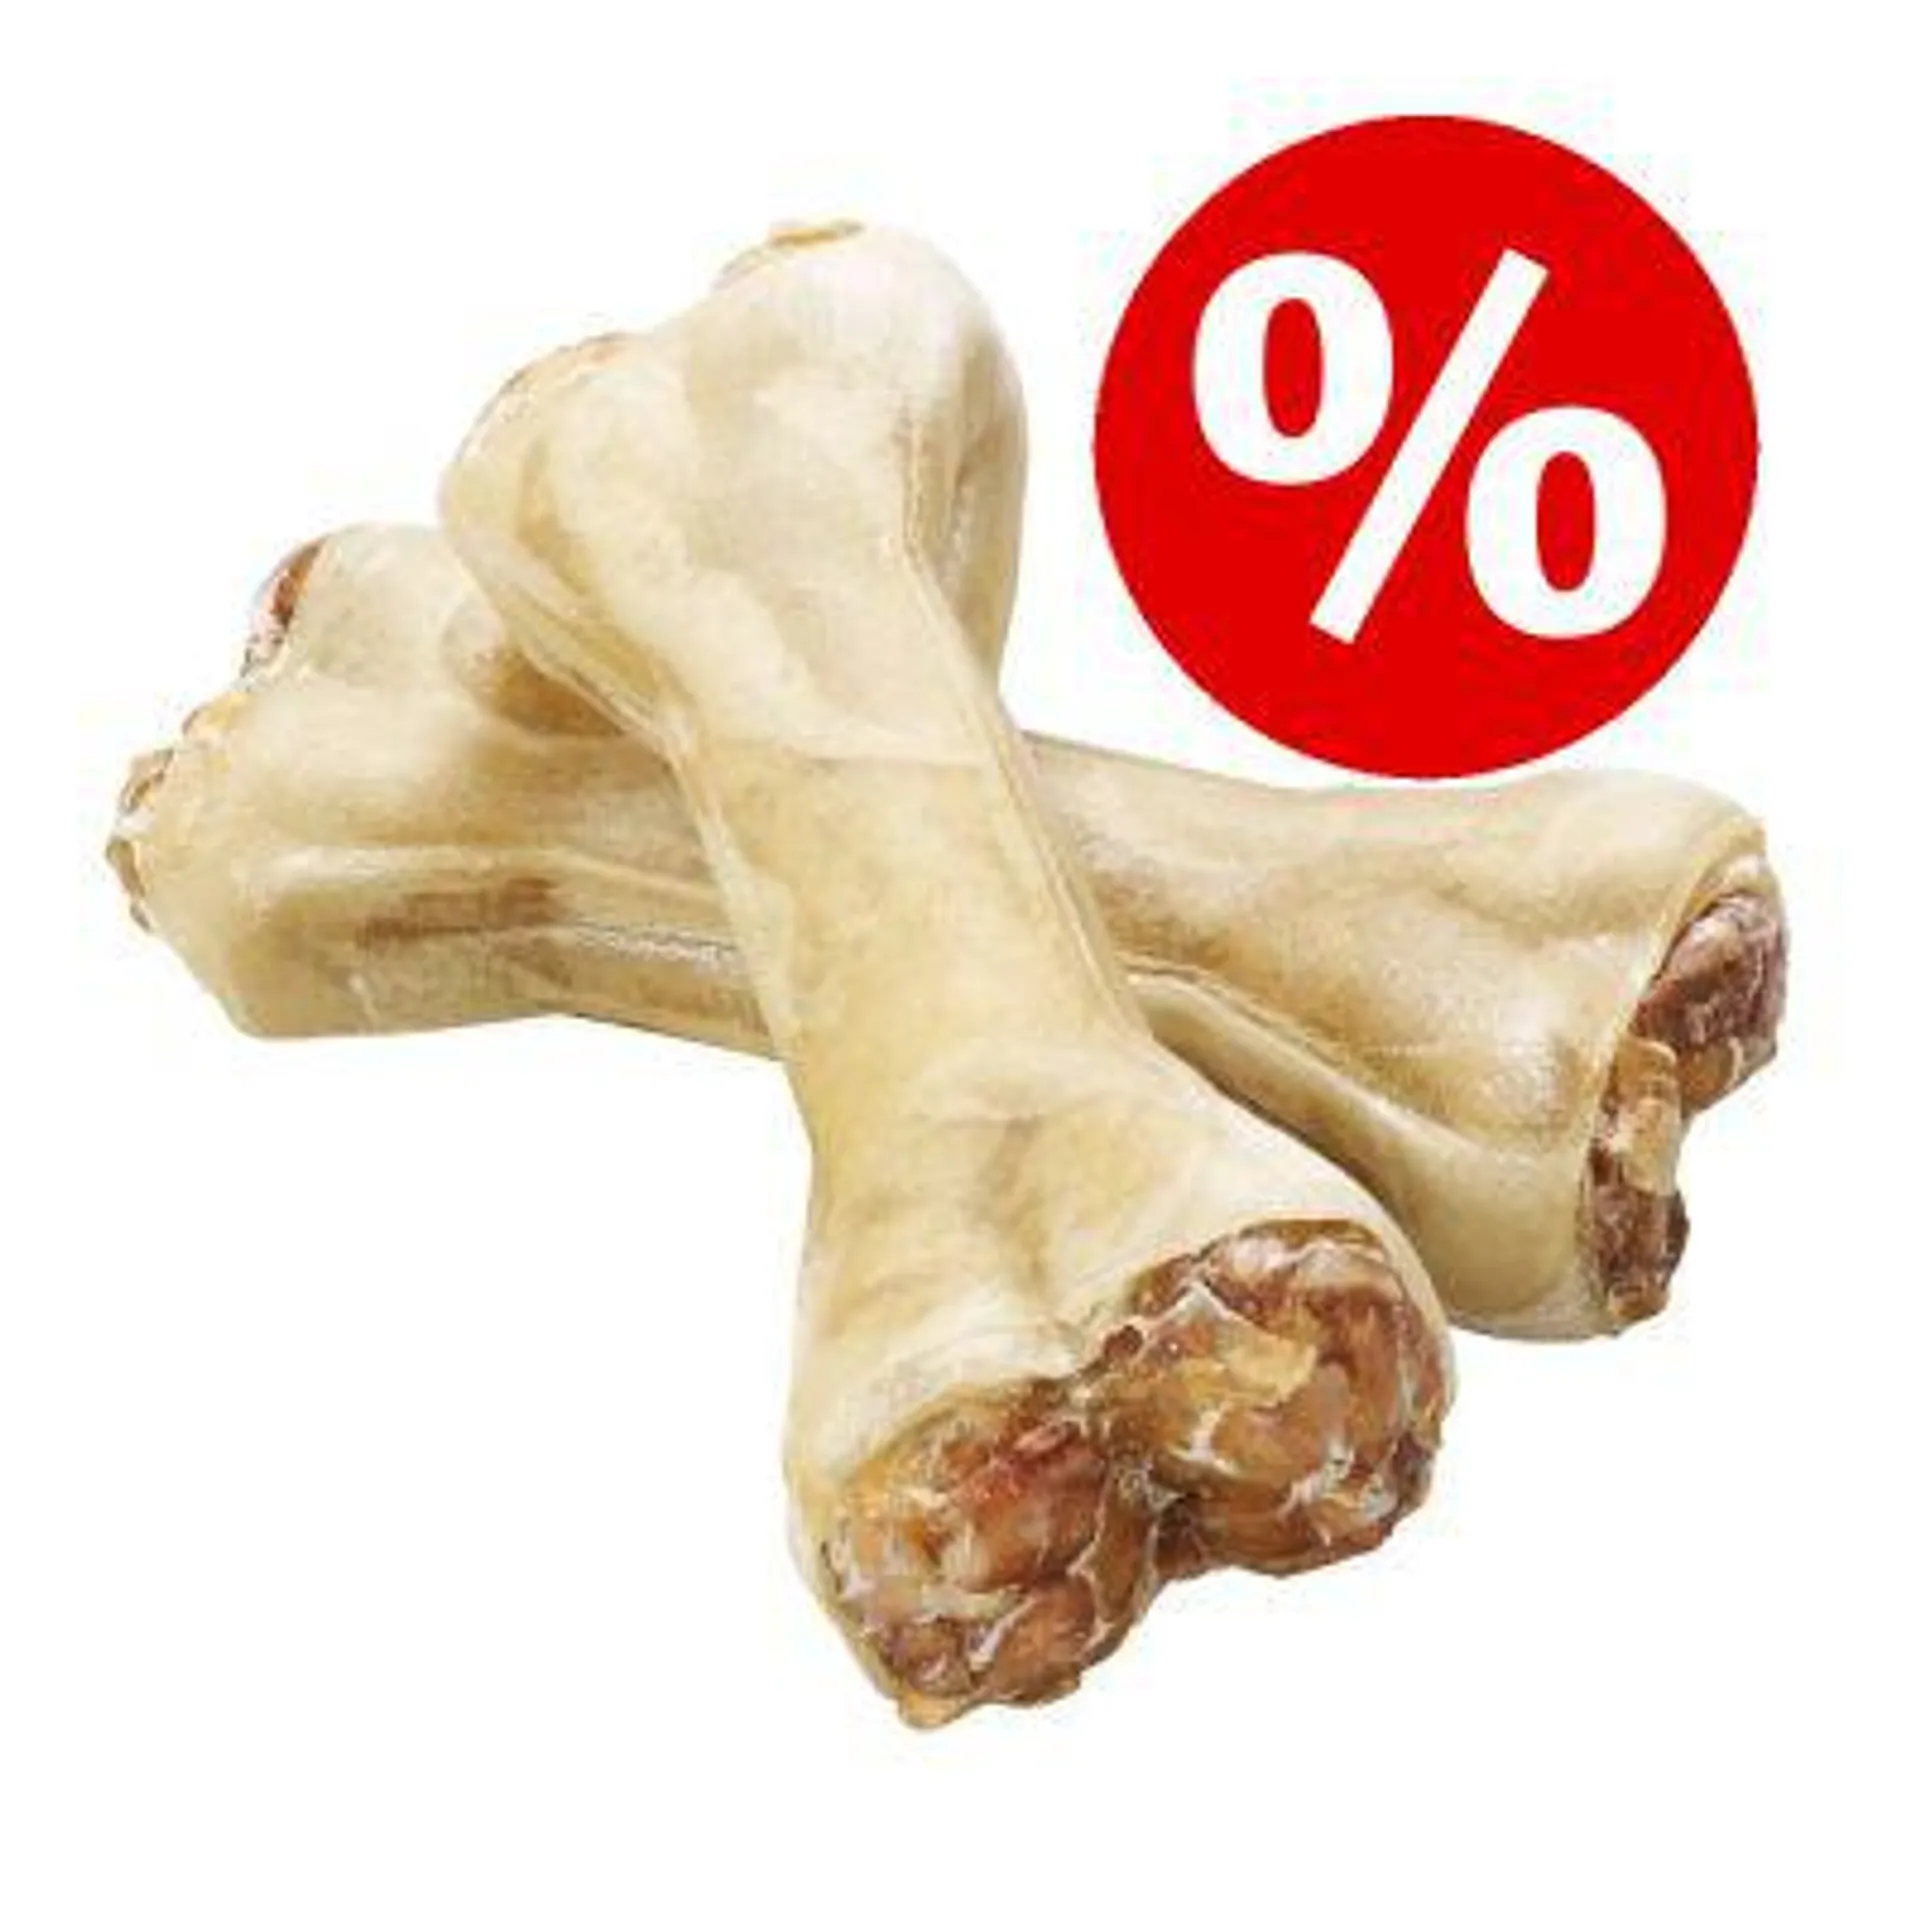 Barkoo Chew Bones with Pizzle Filling Dog Treats - 10% Off!